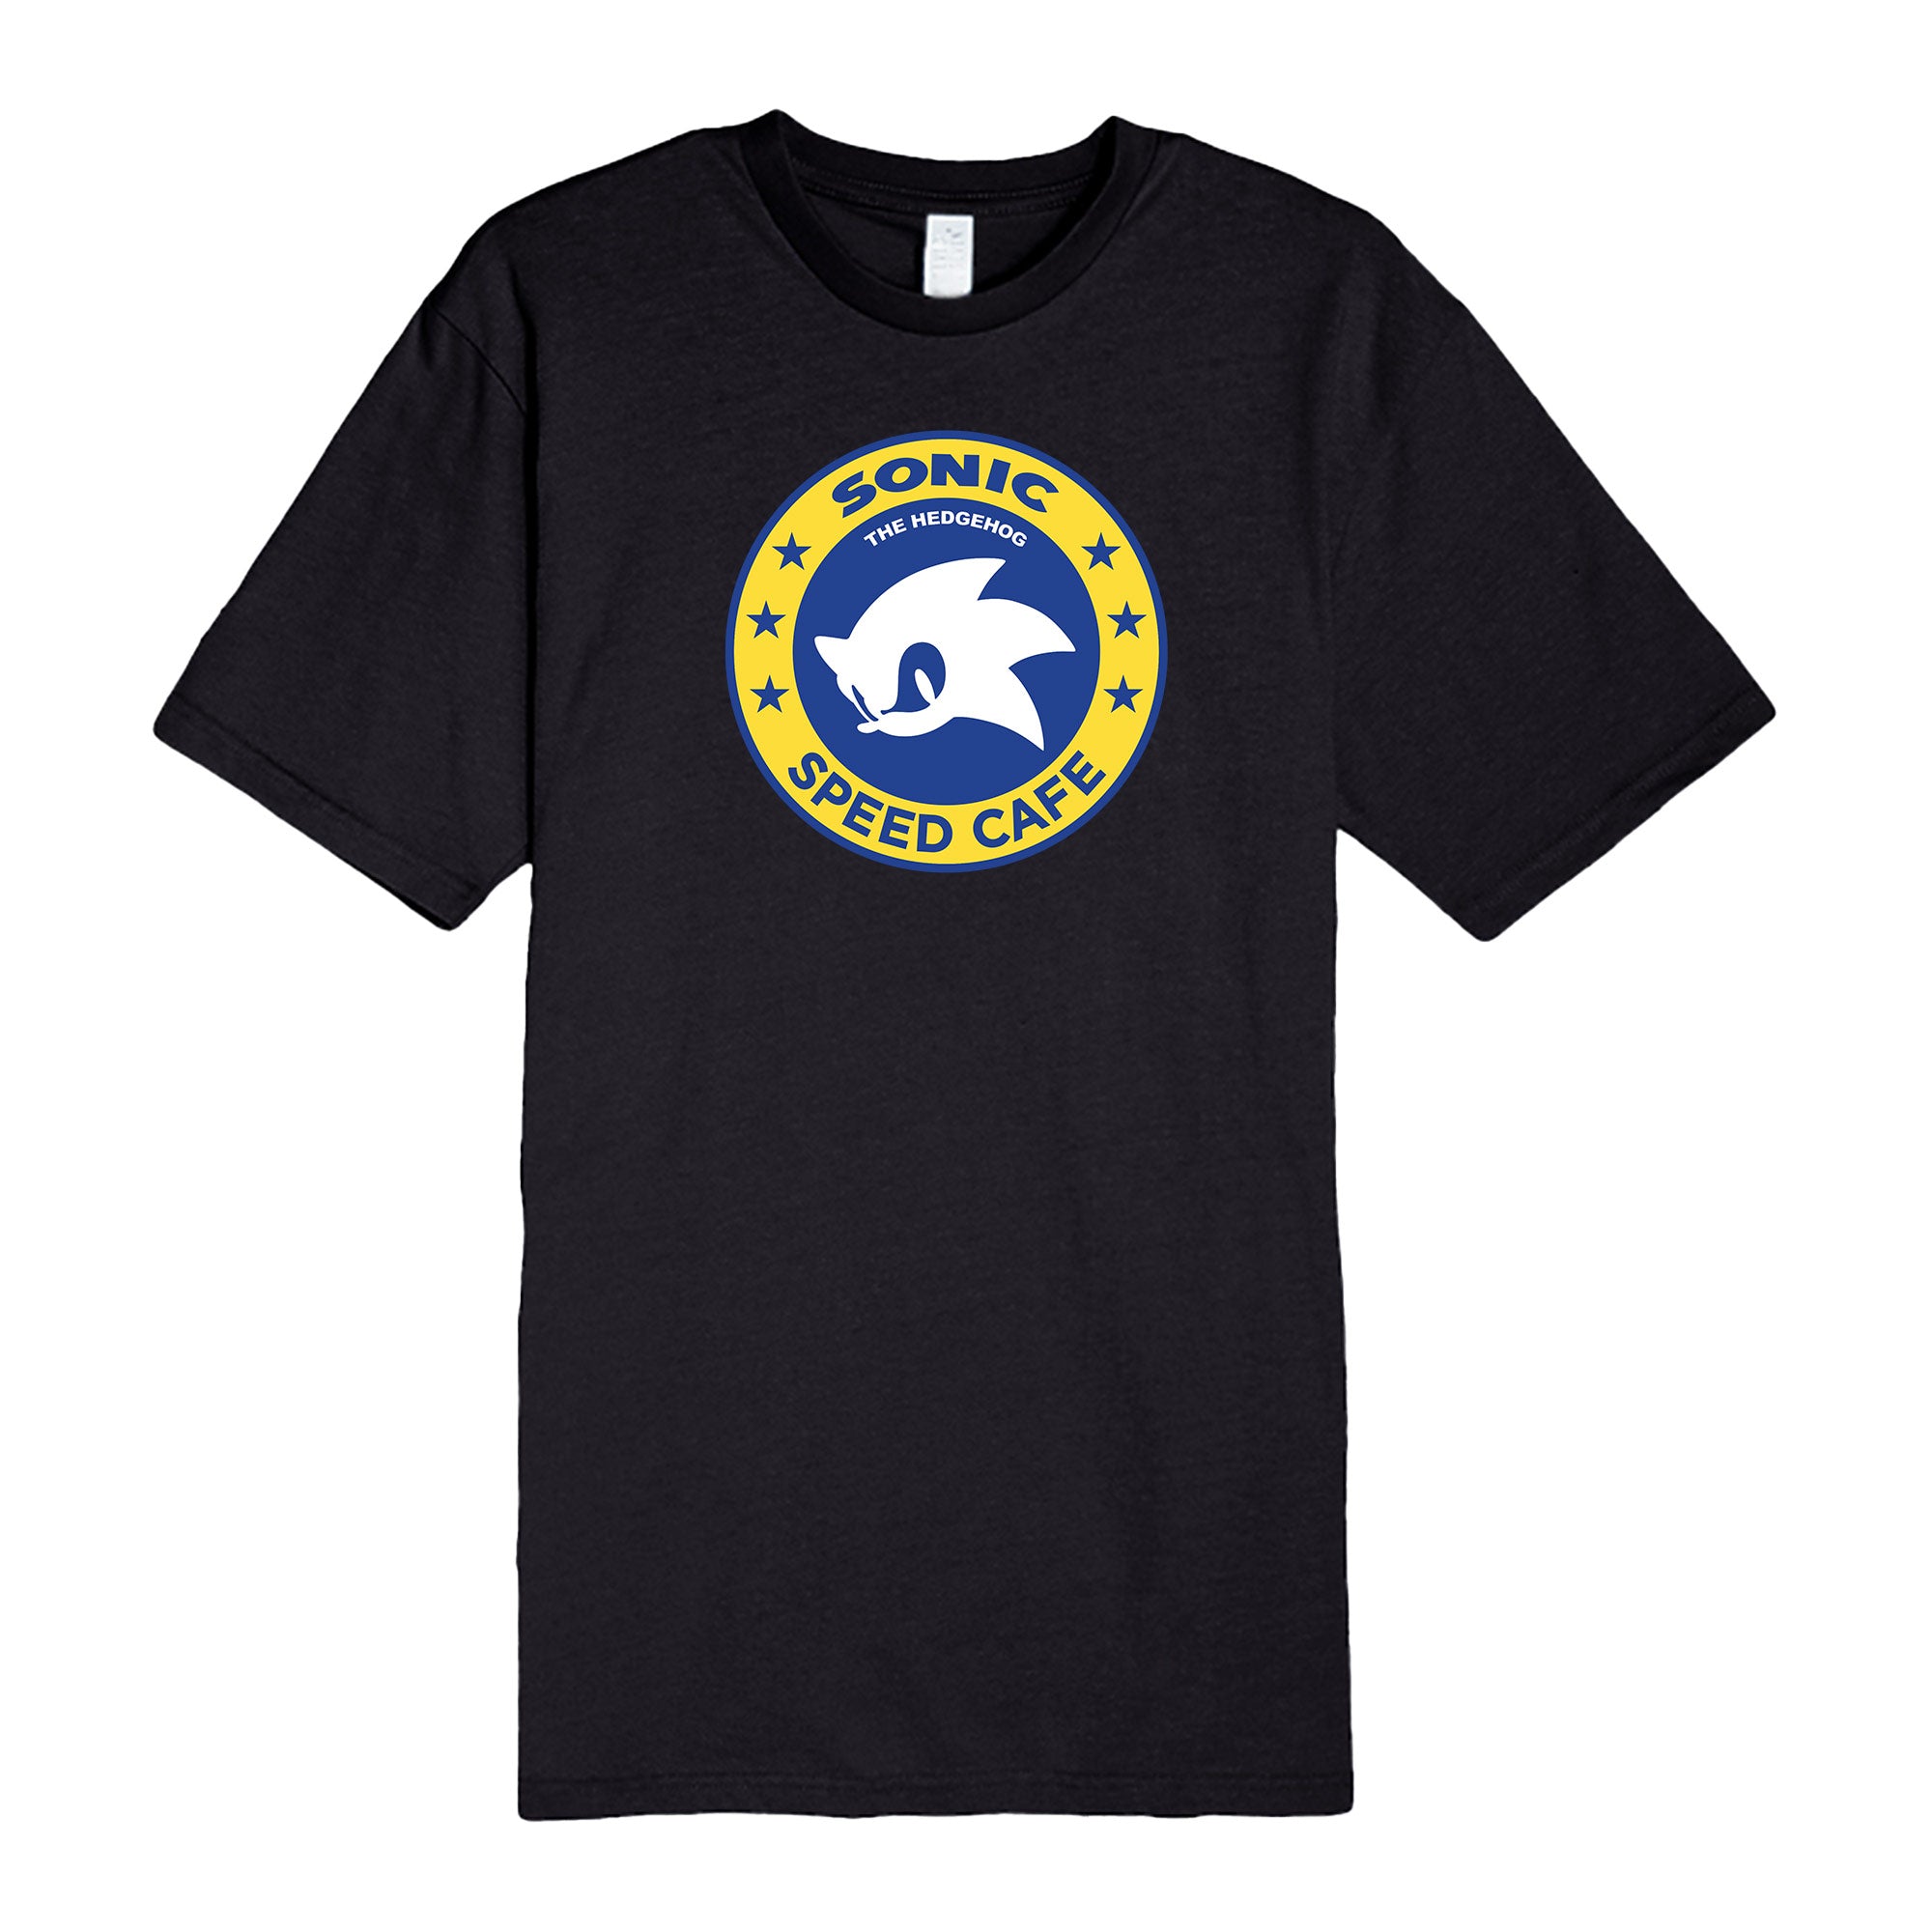 Sonic Speed Café Logo Tee [SOLD OUT] – MerchLabs